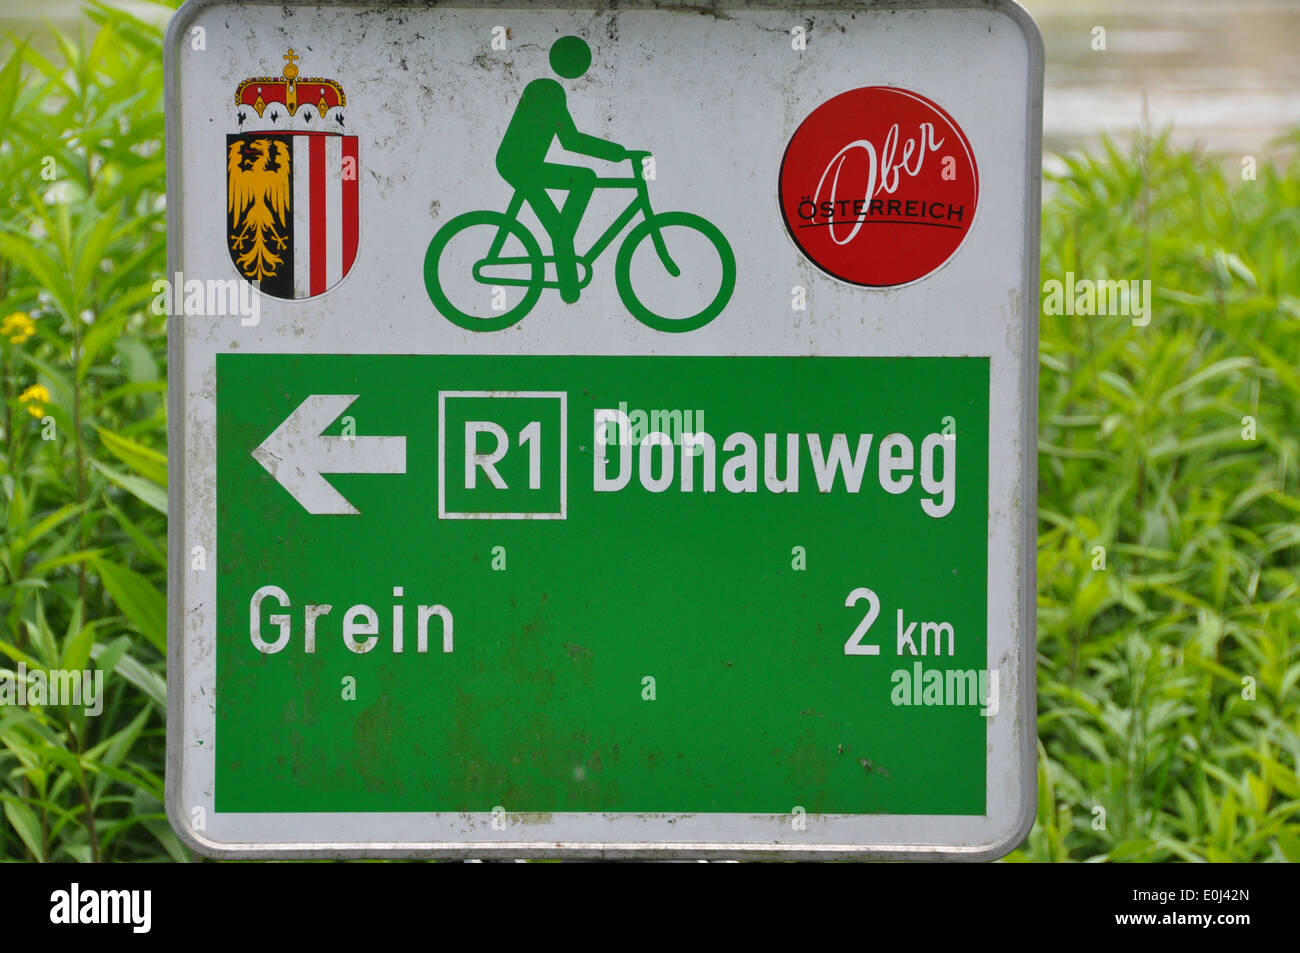 Bike sign indicating Donauweg route 1, and direction to Grein. Stock Photo